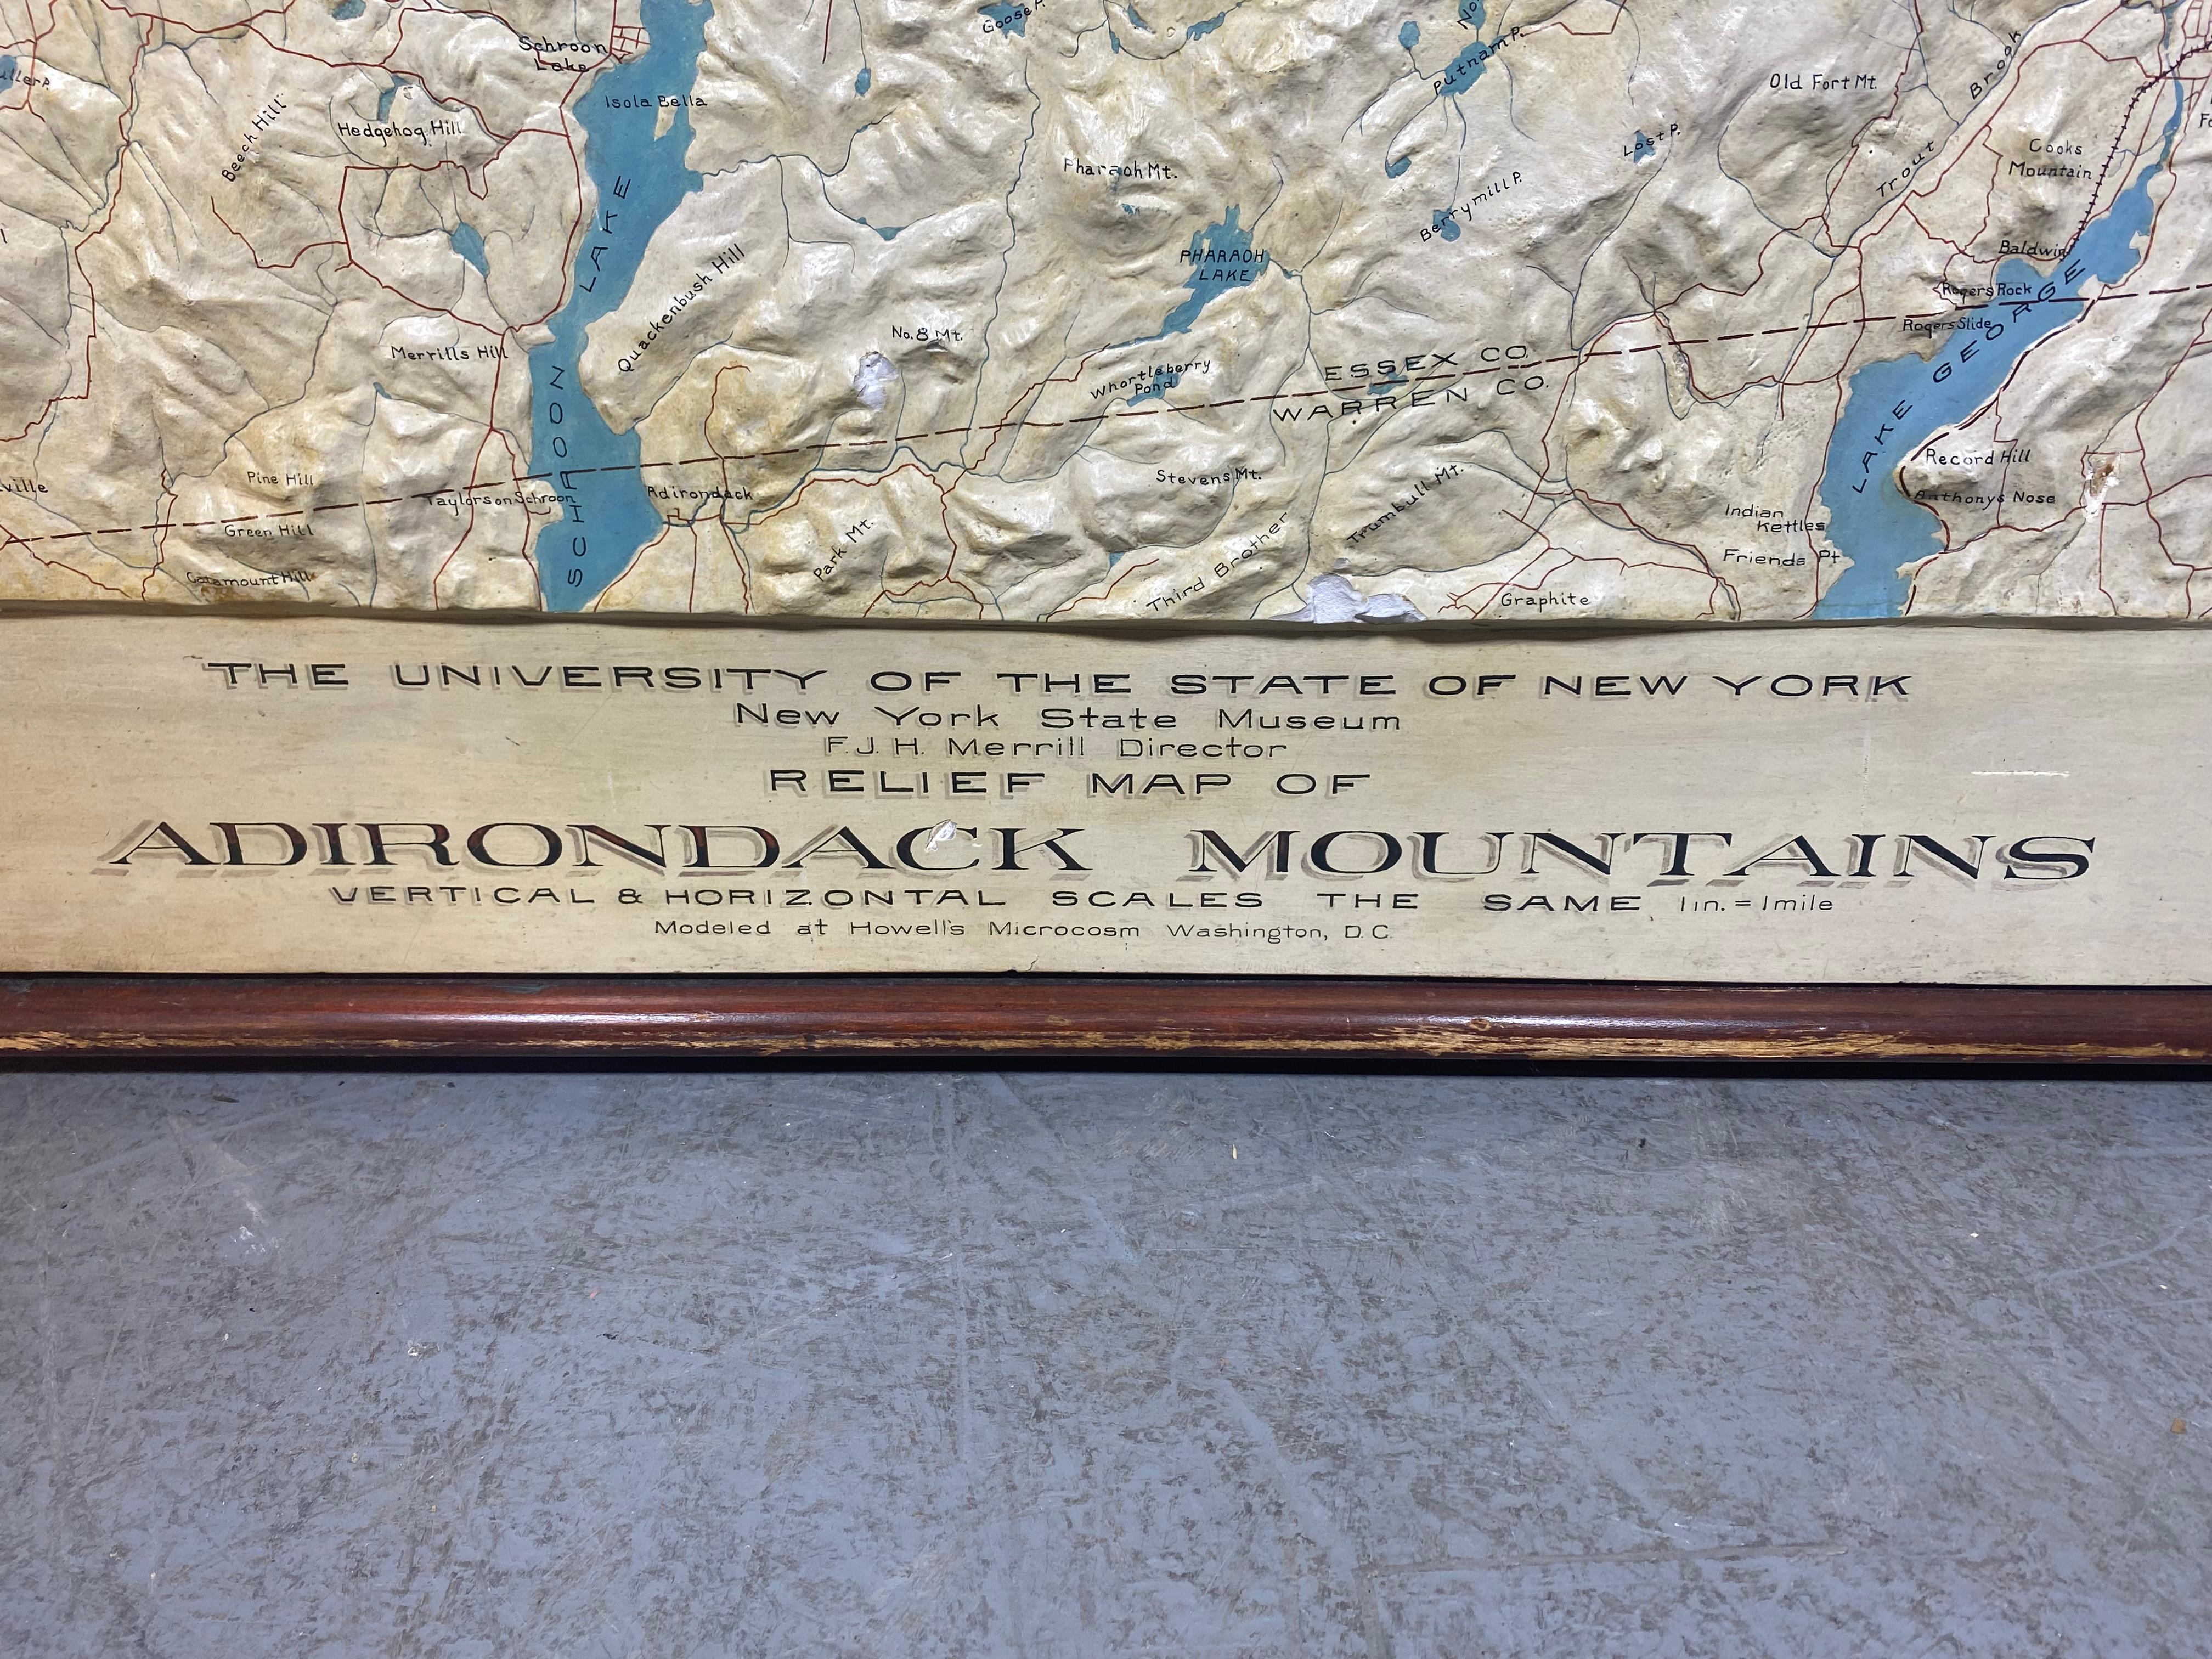 Rare and Early Monumental Plaster Relief Map of Adirondack Mountains by The University of the State of New York,  New York State Museum..F J H Merrill director,,,modeled by Howell's Microcosm,,, Stunning example,, my guess made Turn of the 19th